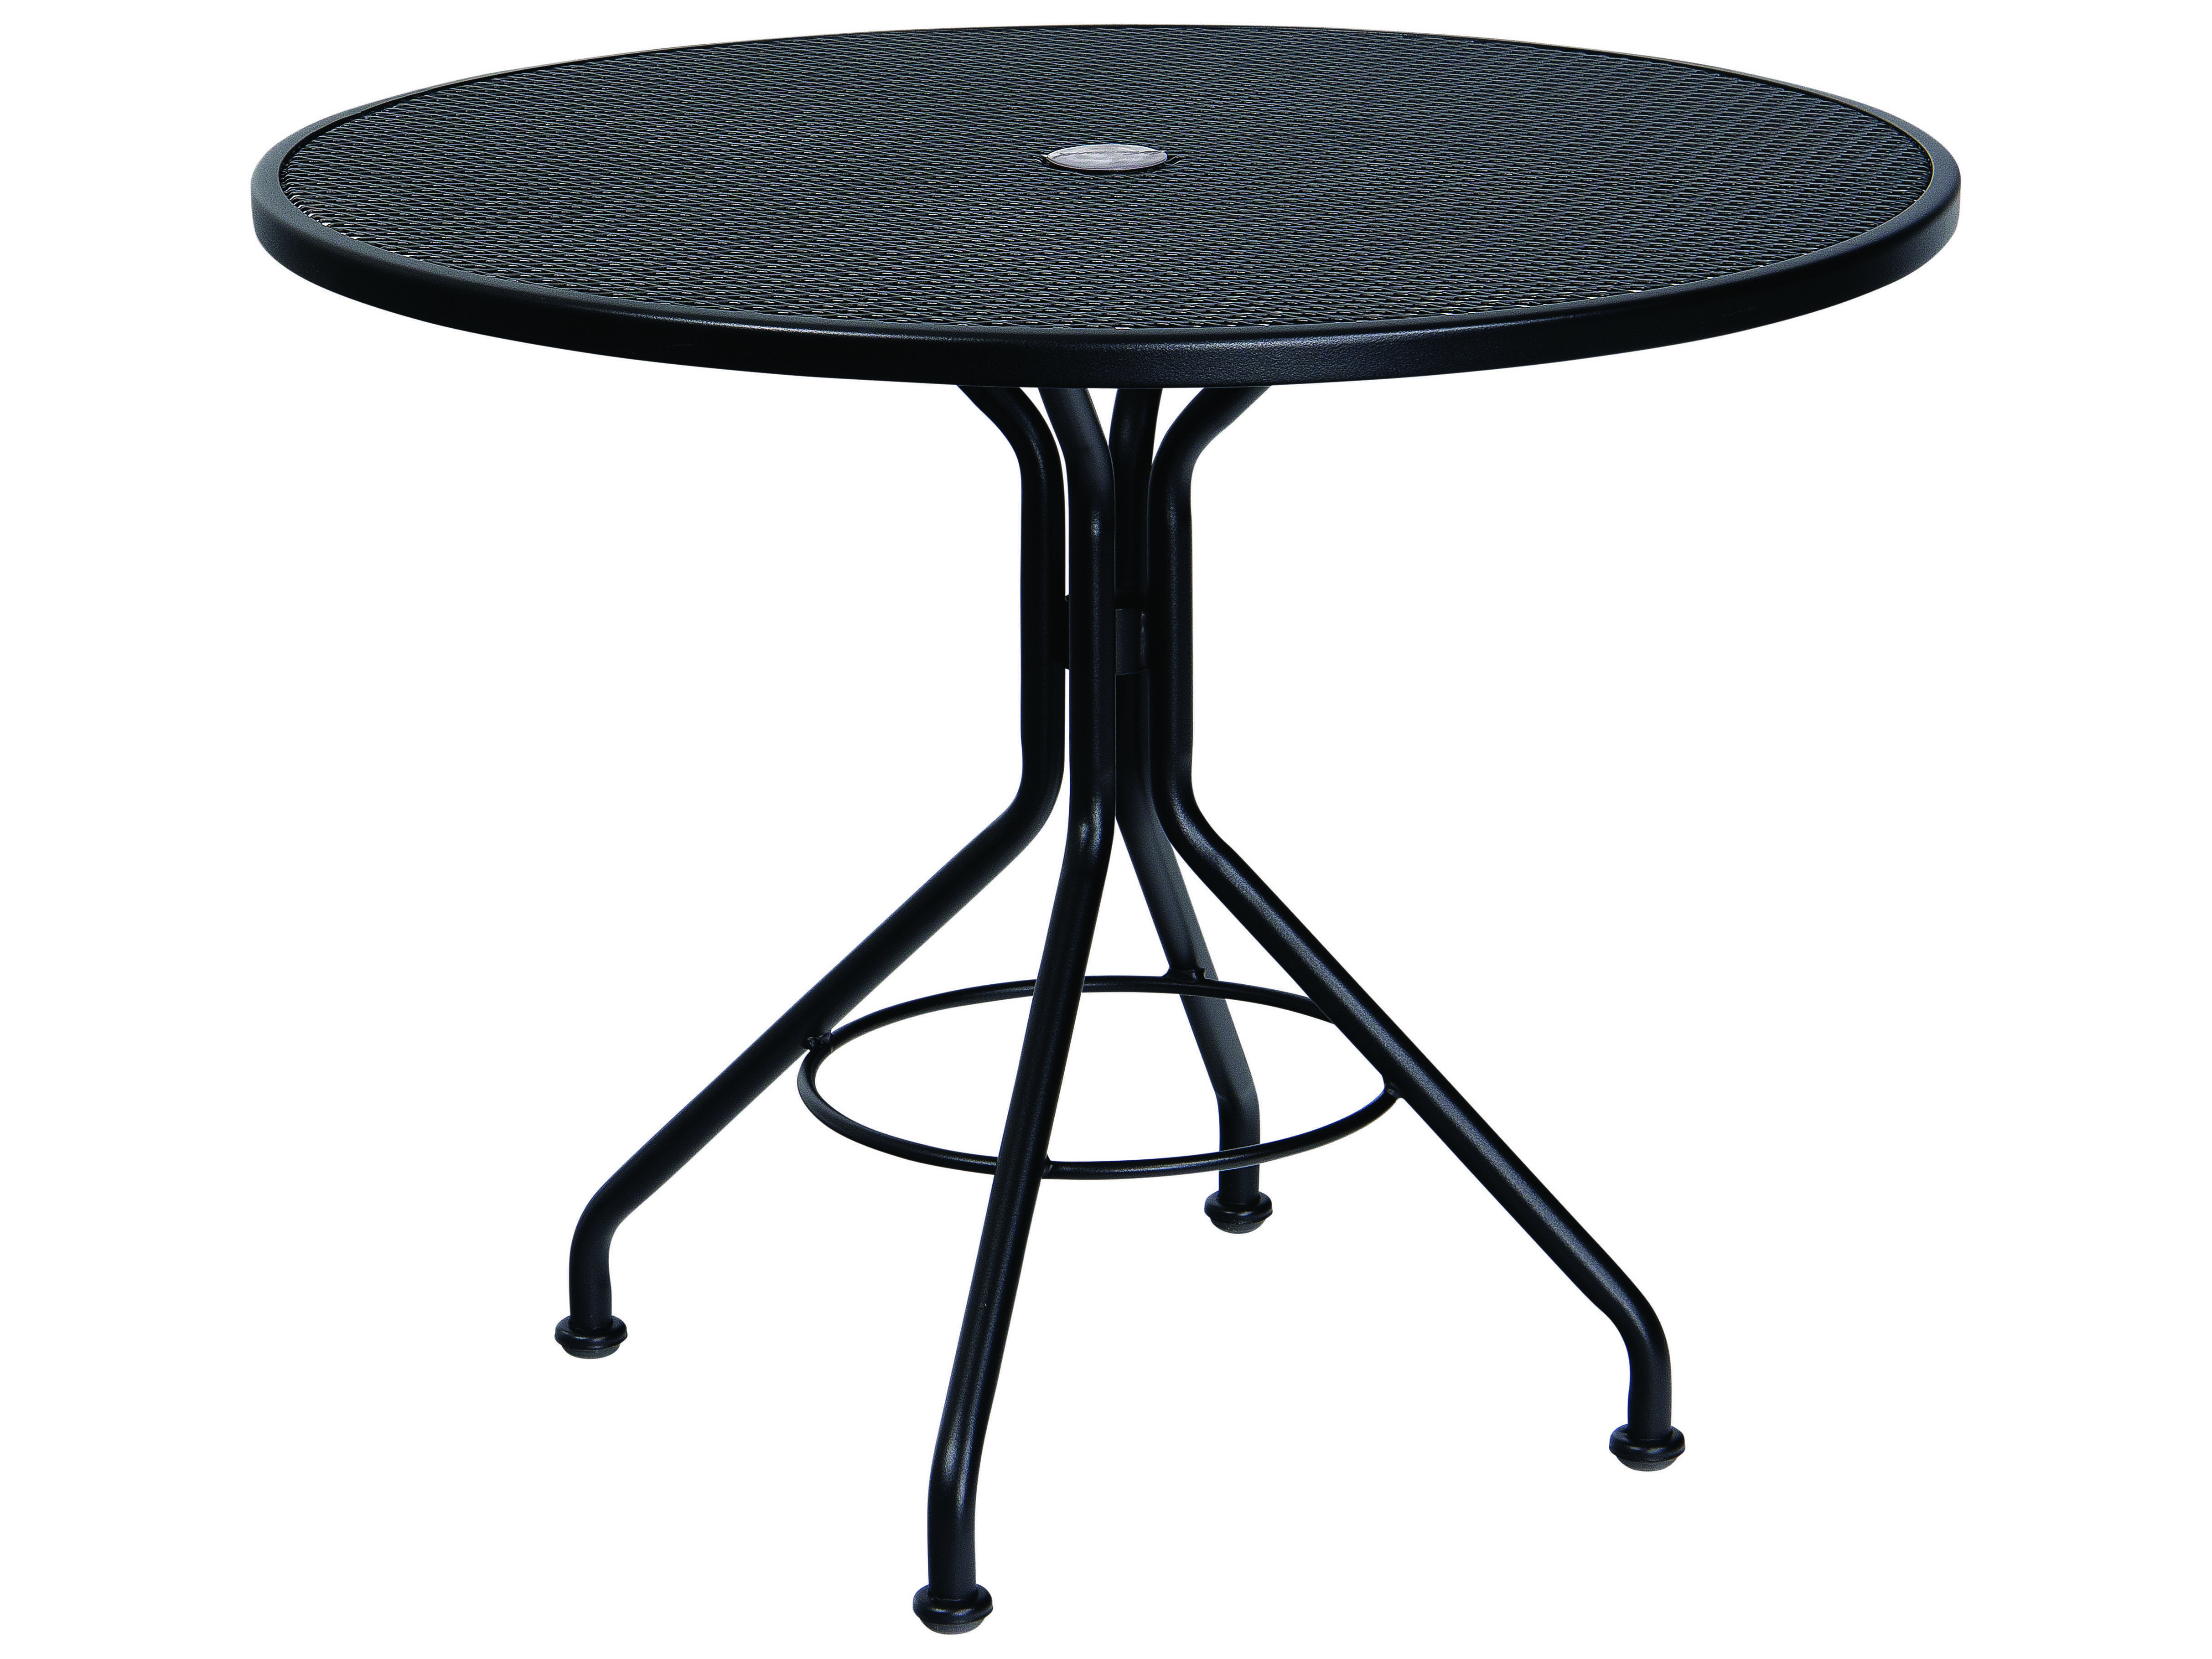 Woodard Wrought Iron Mesh 36 Wide, Round Patio Table With Umbrella Hole And Chairs